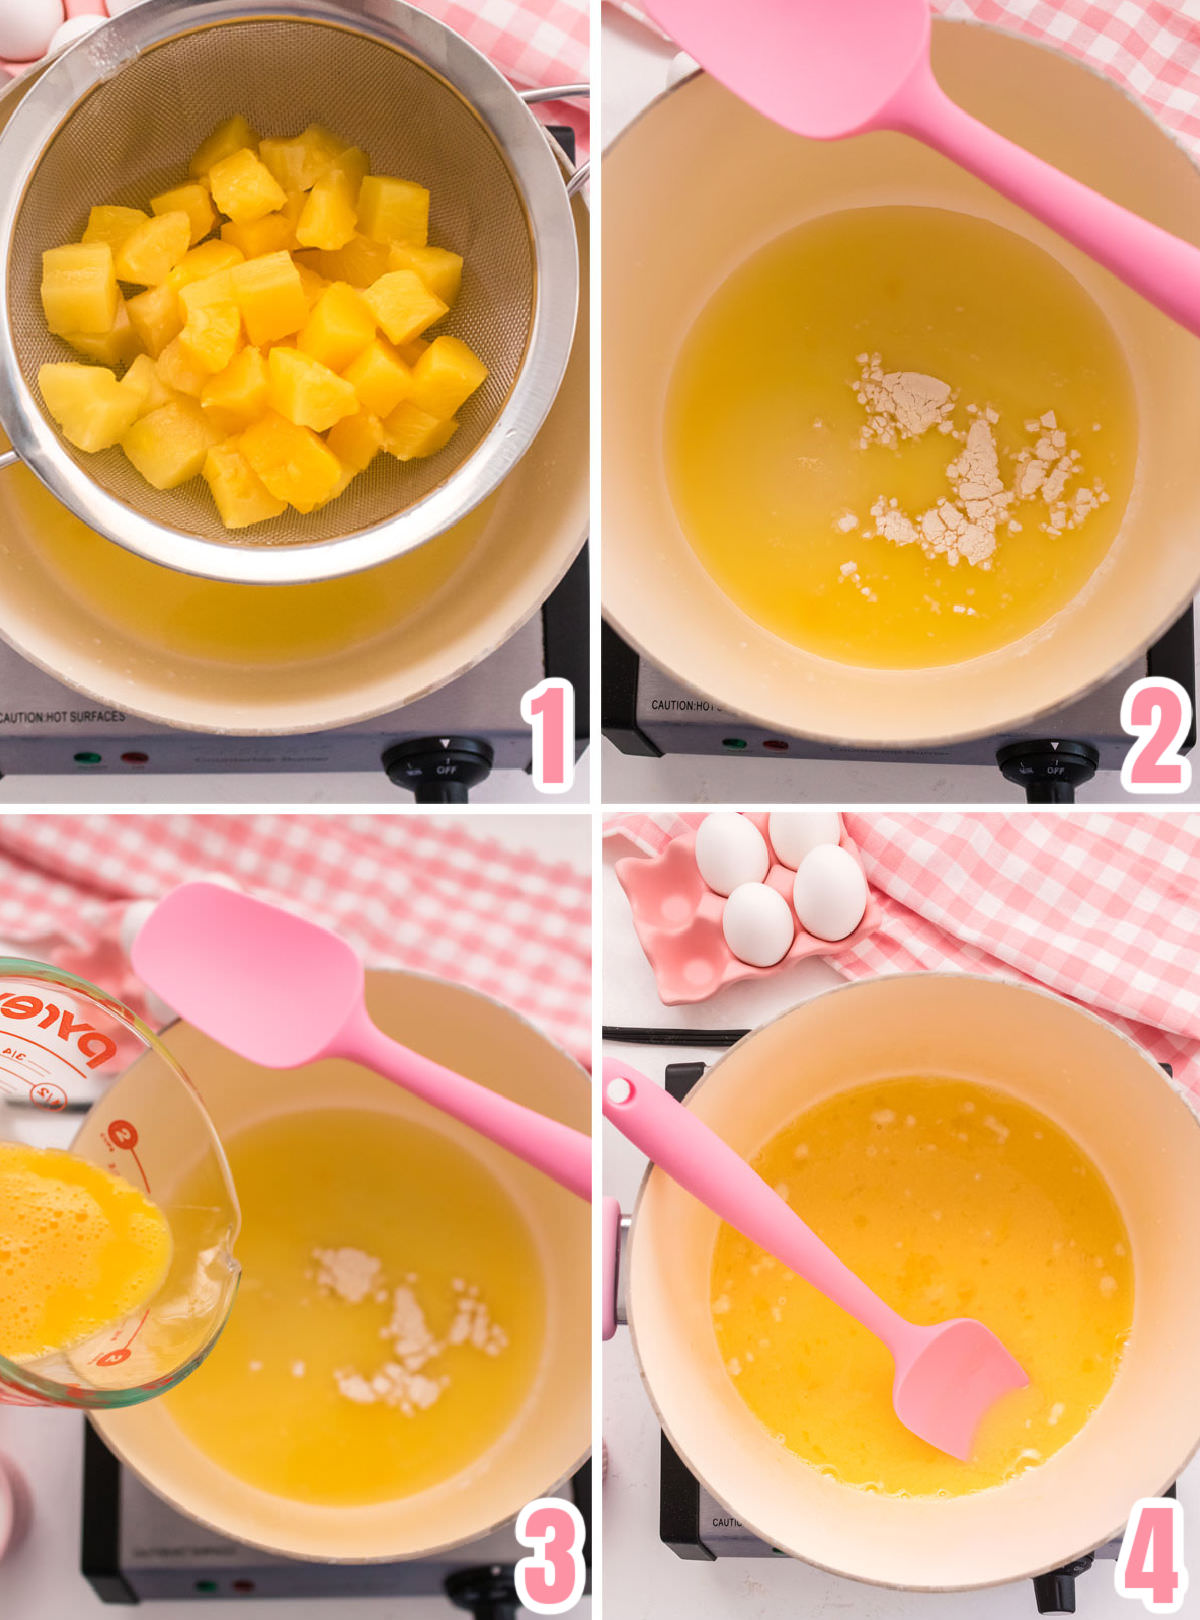 Collage image showing the steps for making the pineapple custard mixture for Pineapple Banana Fluff.